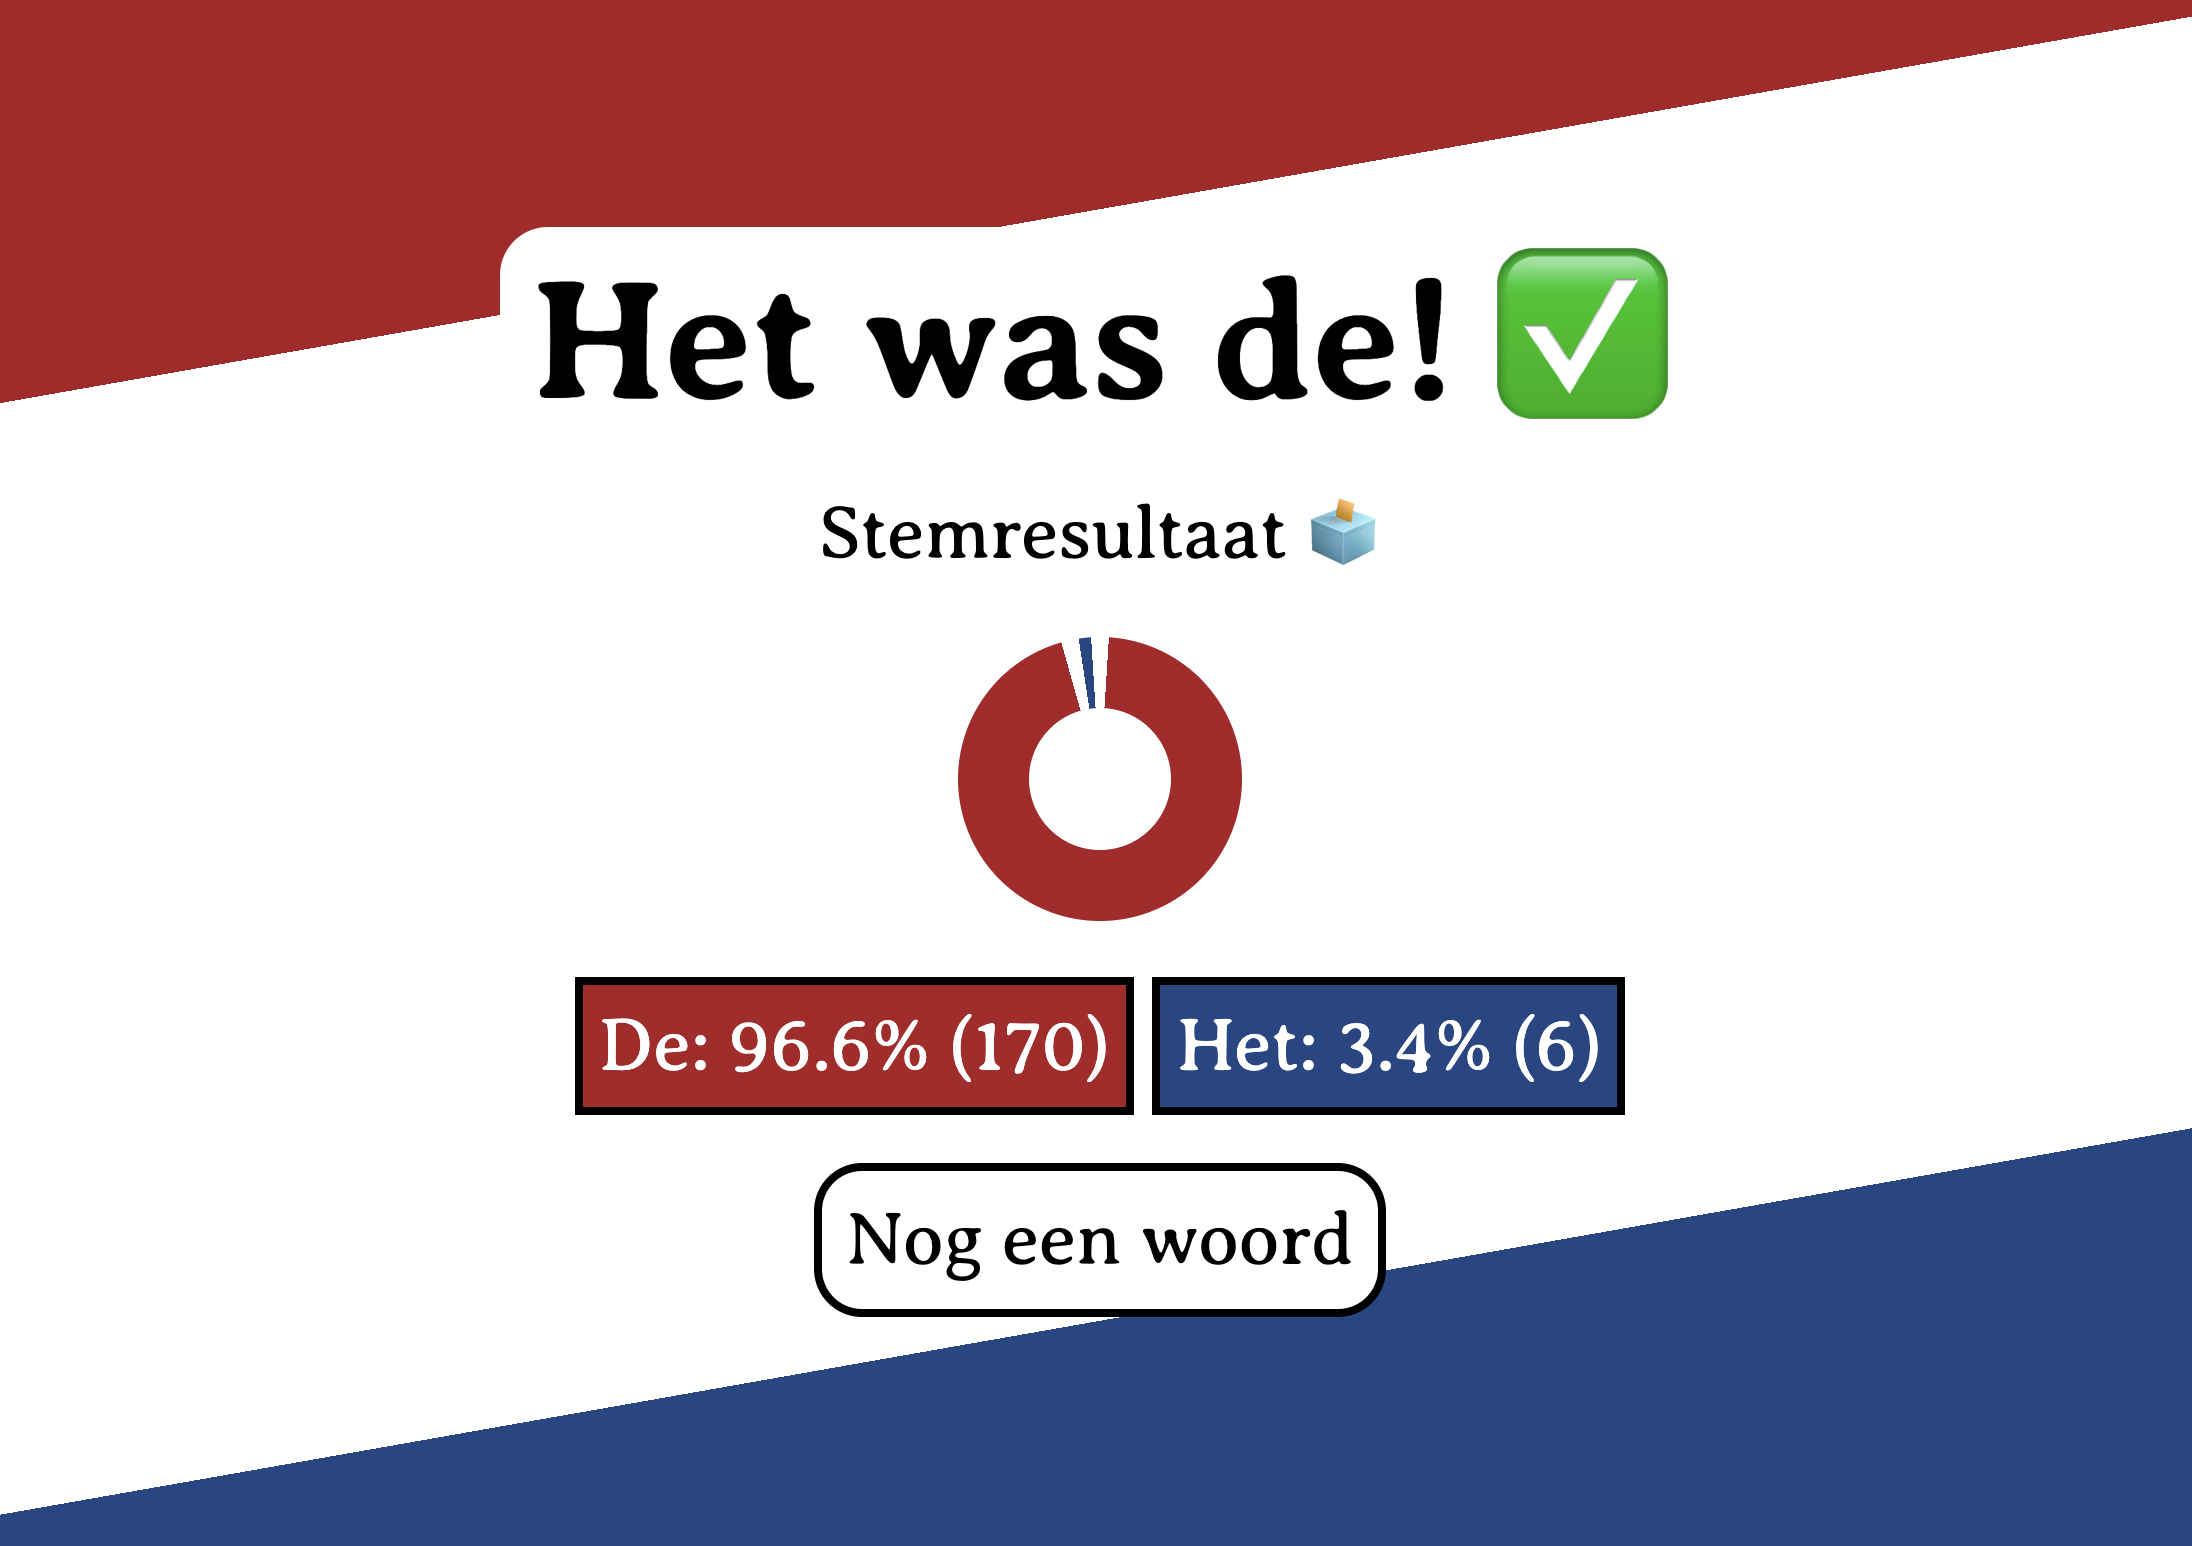 A screenshot of the results for 'fiets', stating 'de' is the correct answer and that there were 170 votes for 'de' and 6 for 'het'